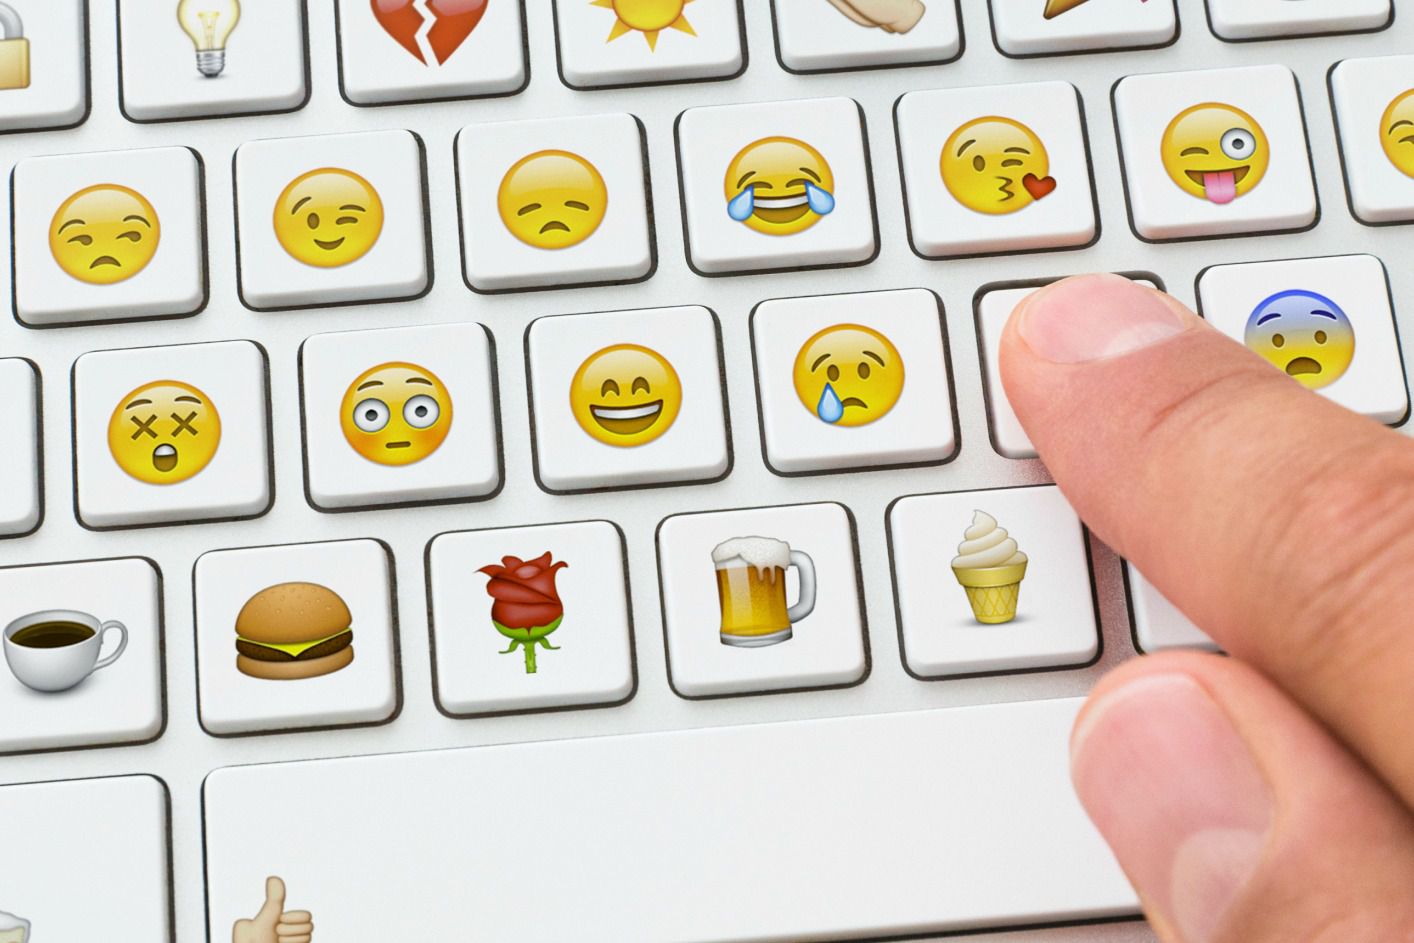 Discover Hidden Facebook Emoticons You've Always Wanted To Use